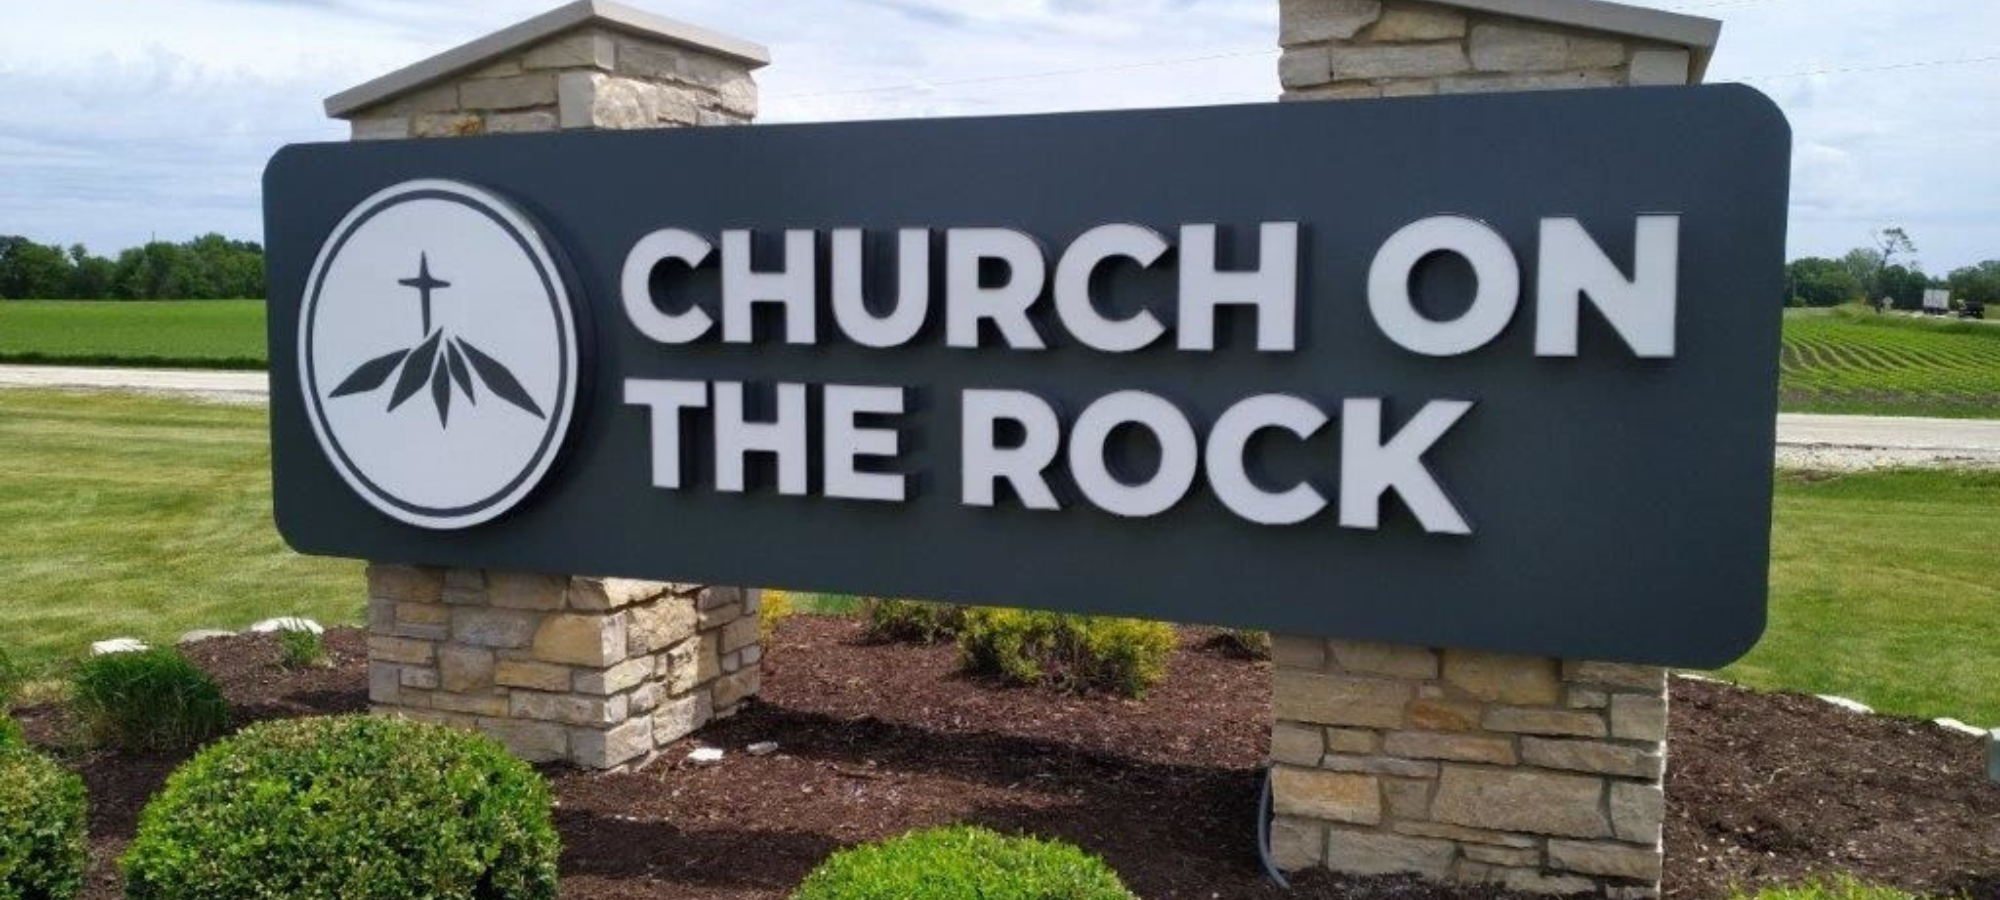 A large monument sign reading "Chuch on the Rock" in white letters on a black background